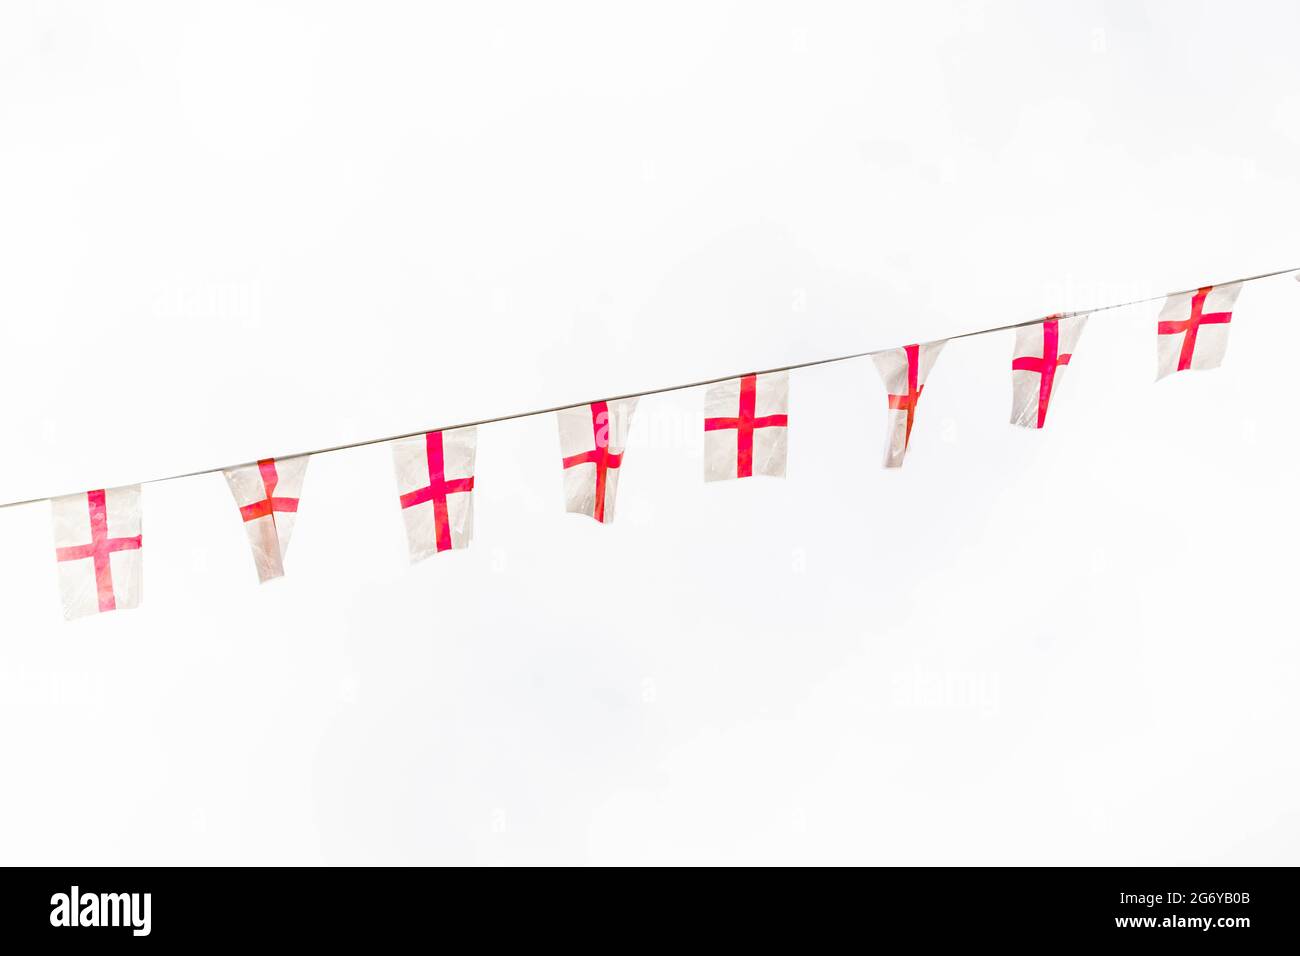 England bunting against on a cloudy sky in support of England in the Euro 2020 football tournament Stock Photo